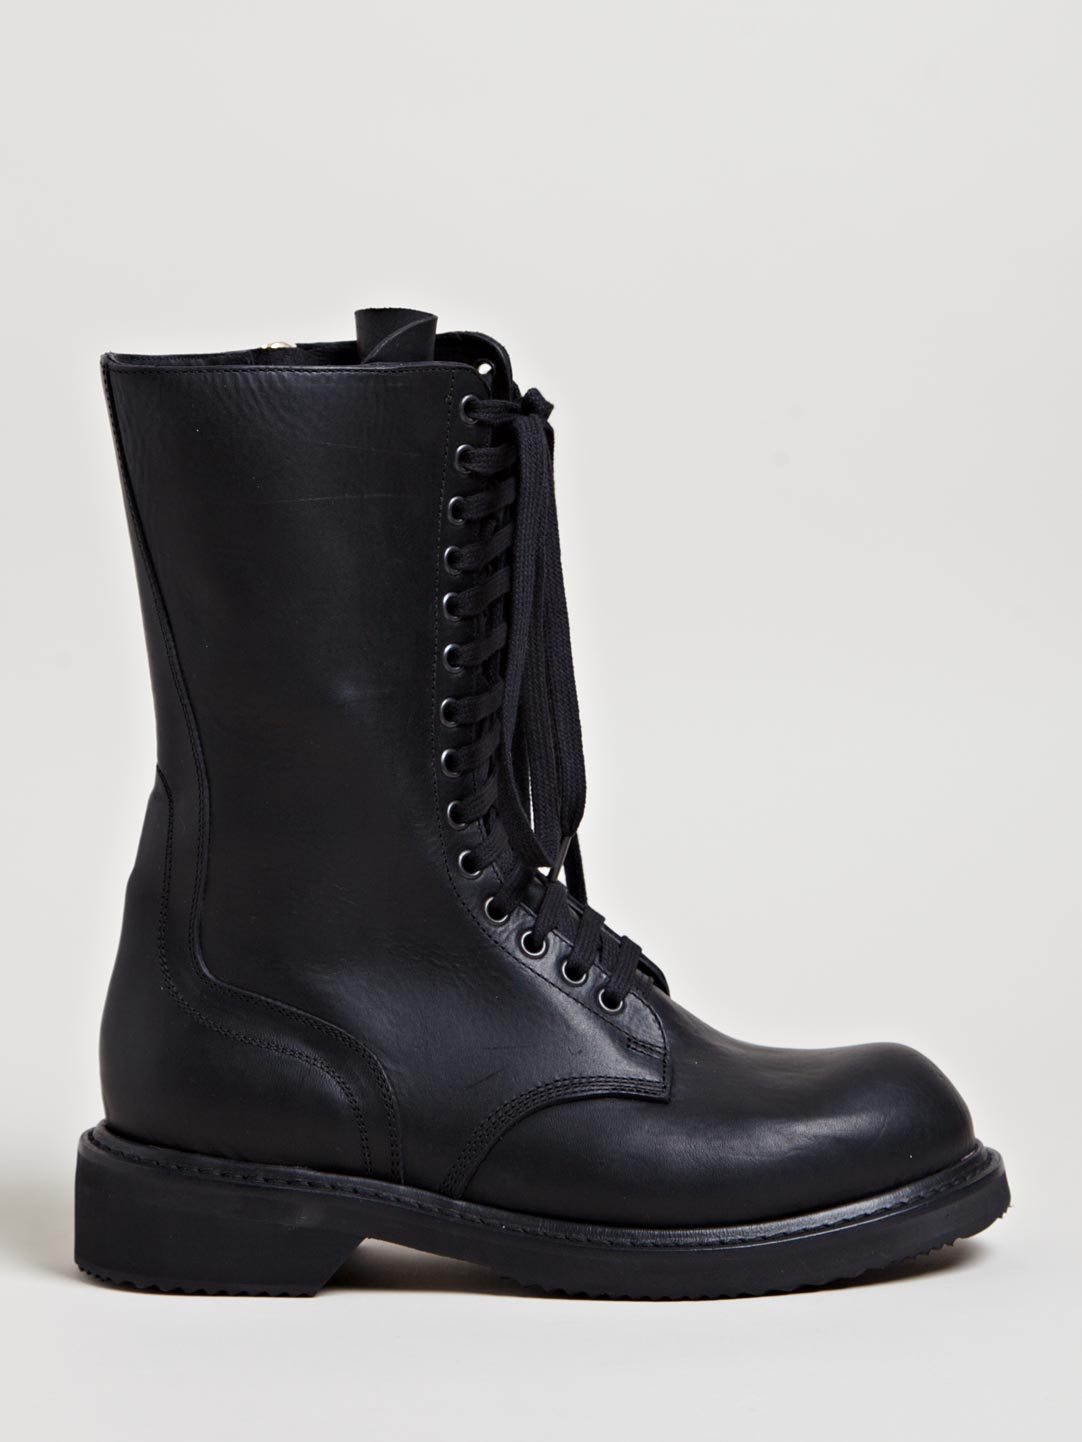 Rick Owens Womens Army Boots in Black - Lyst